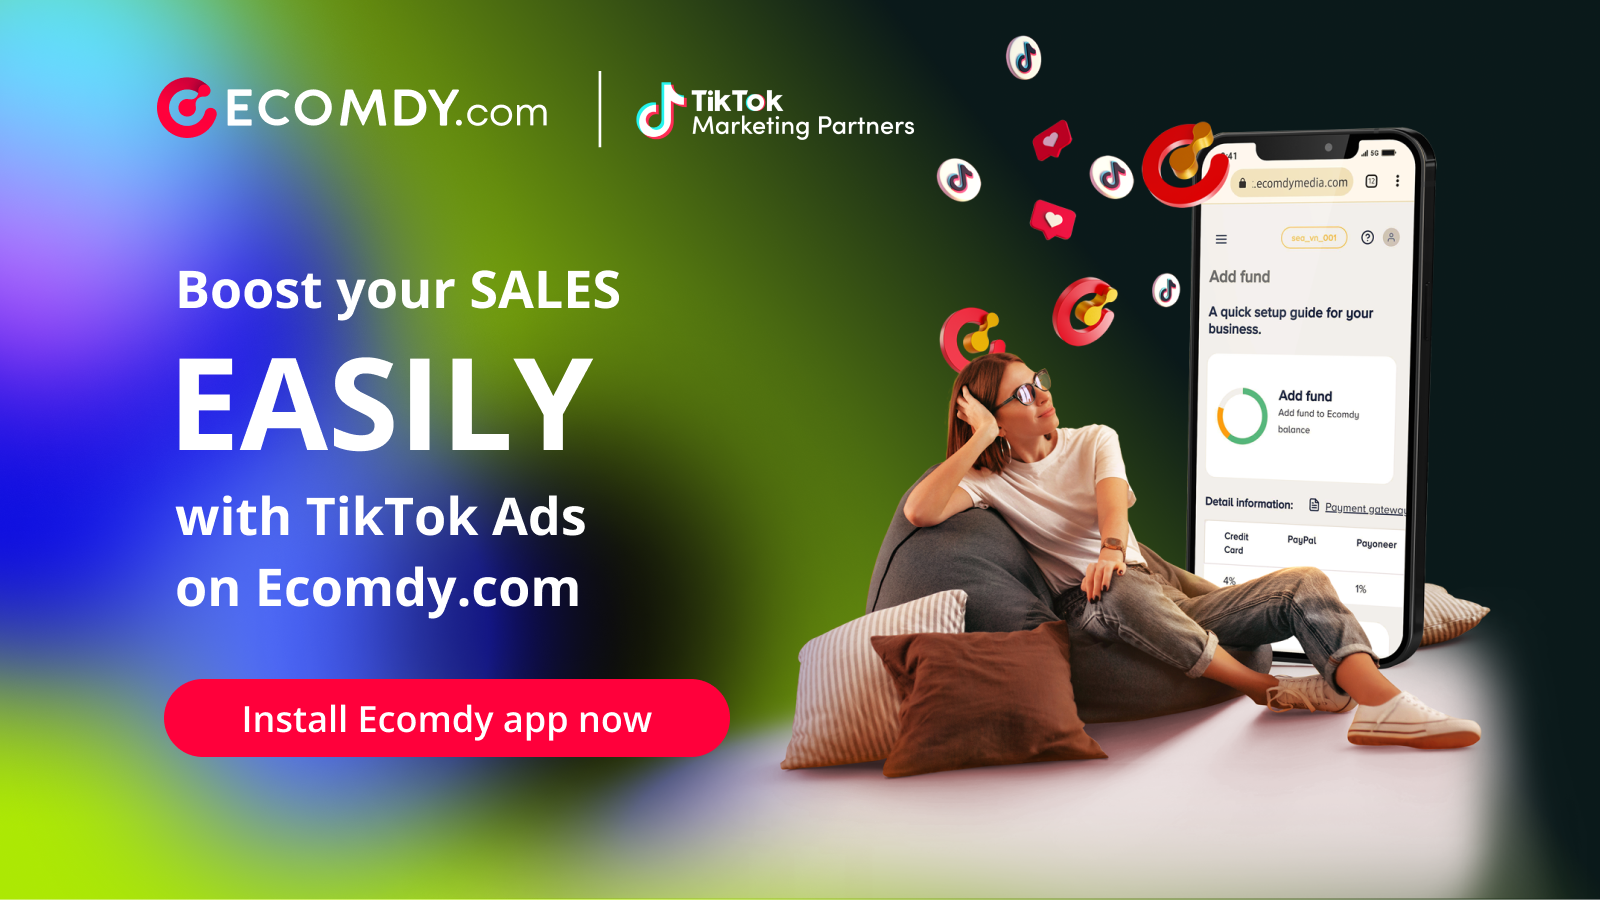 Boost sales easily with TikTok Ads on Ecomdy.com